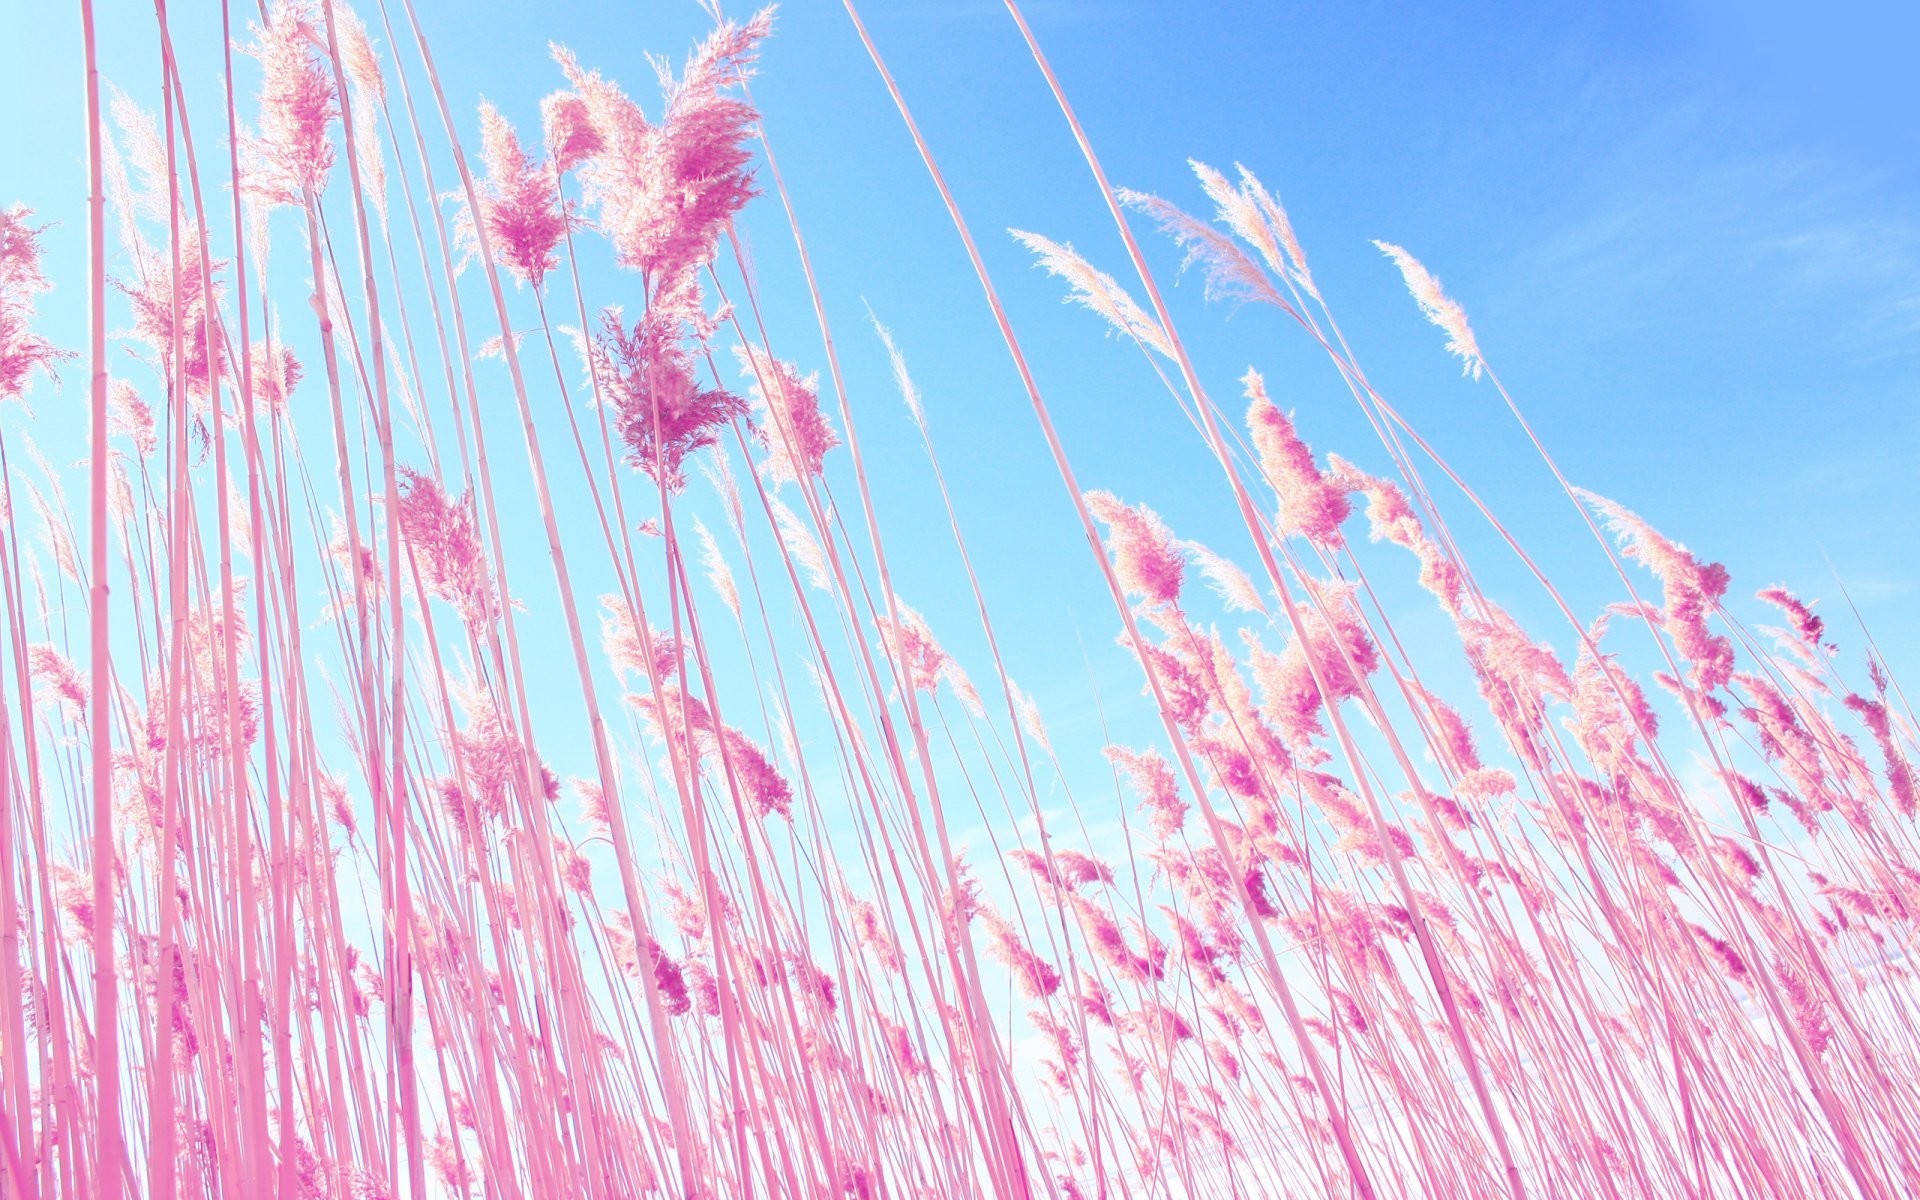 nature plant pink ears spikes blue sky blue sky pink